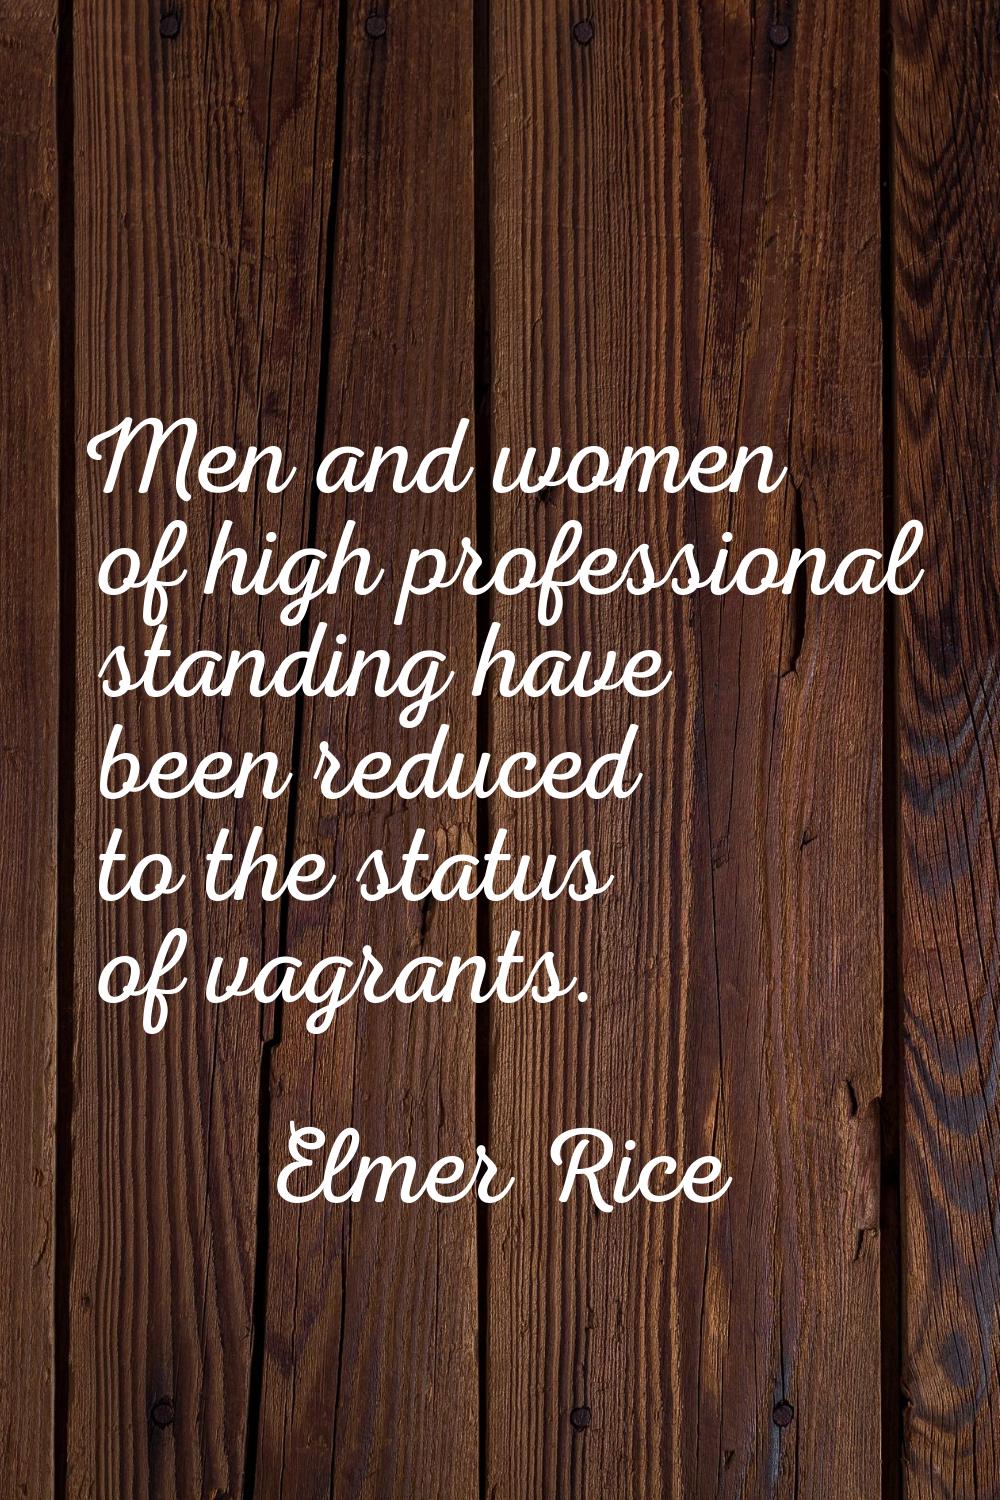 Men and women of high professional standing have been reduced to the status of vagrants.